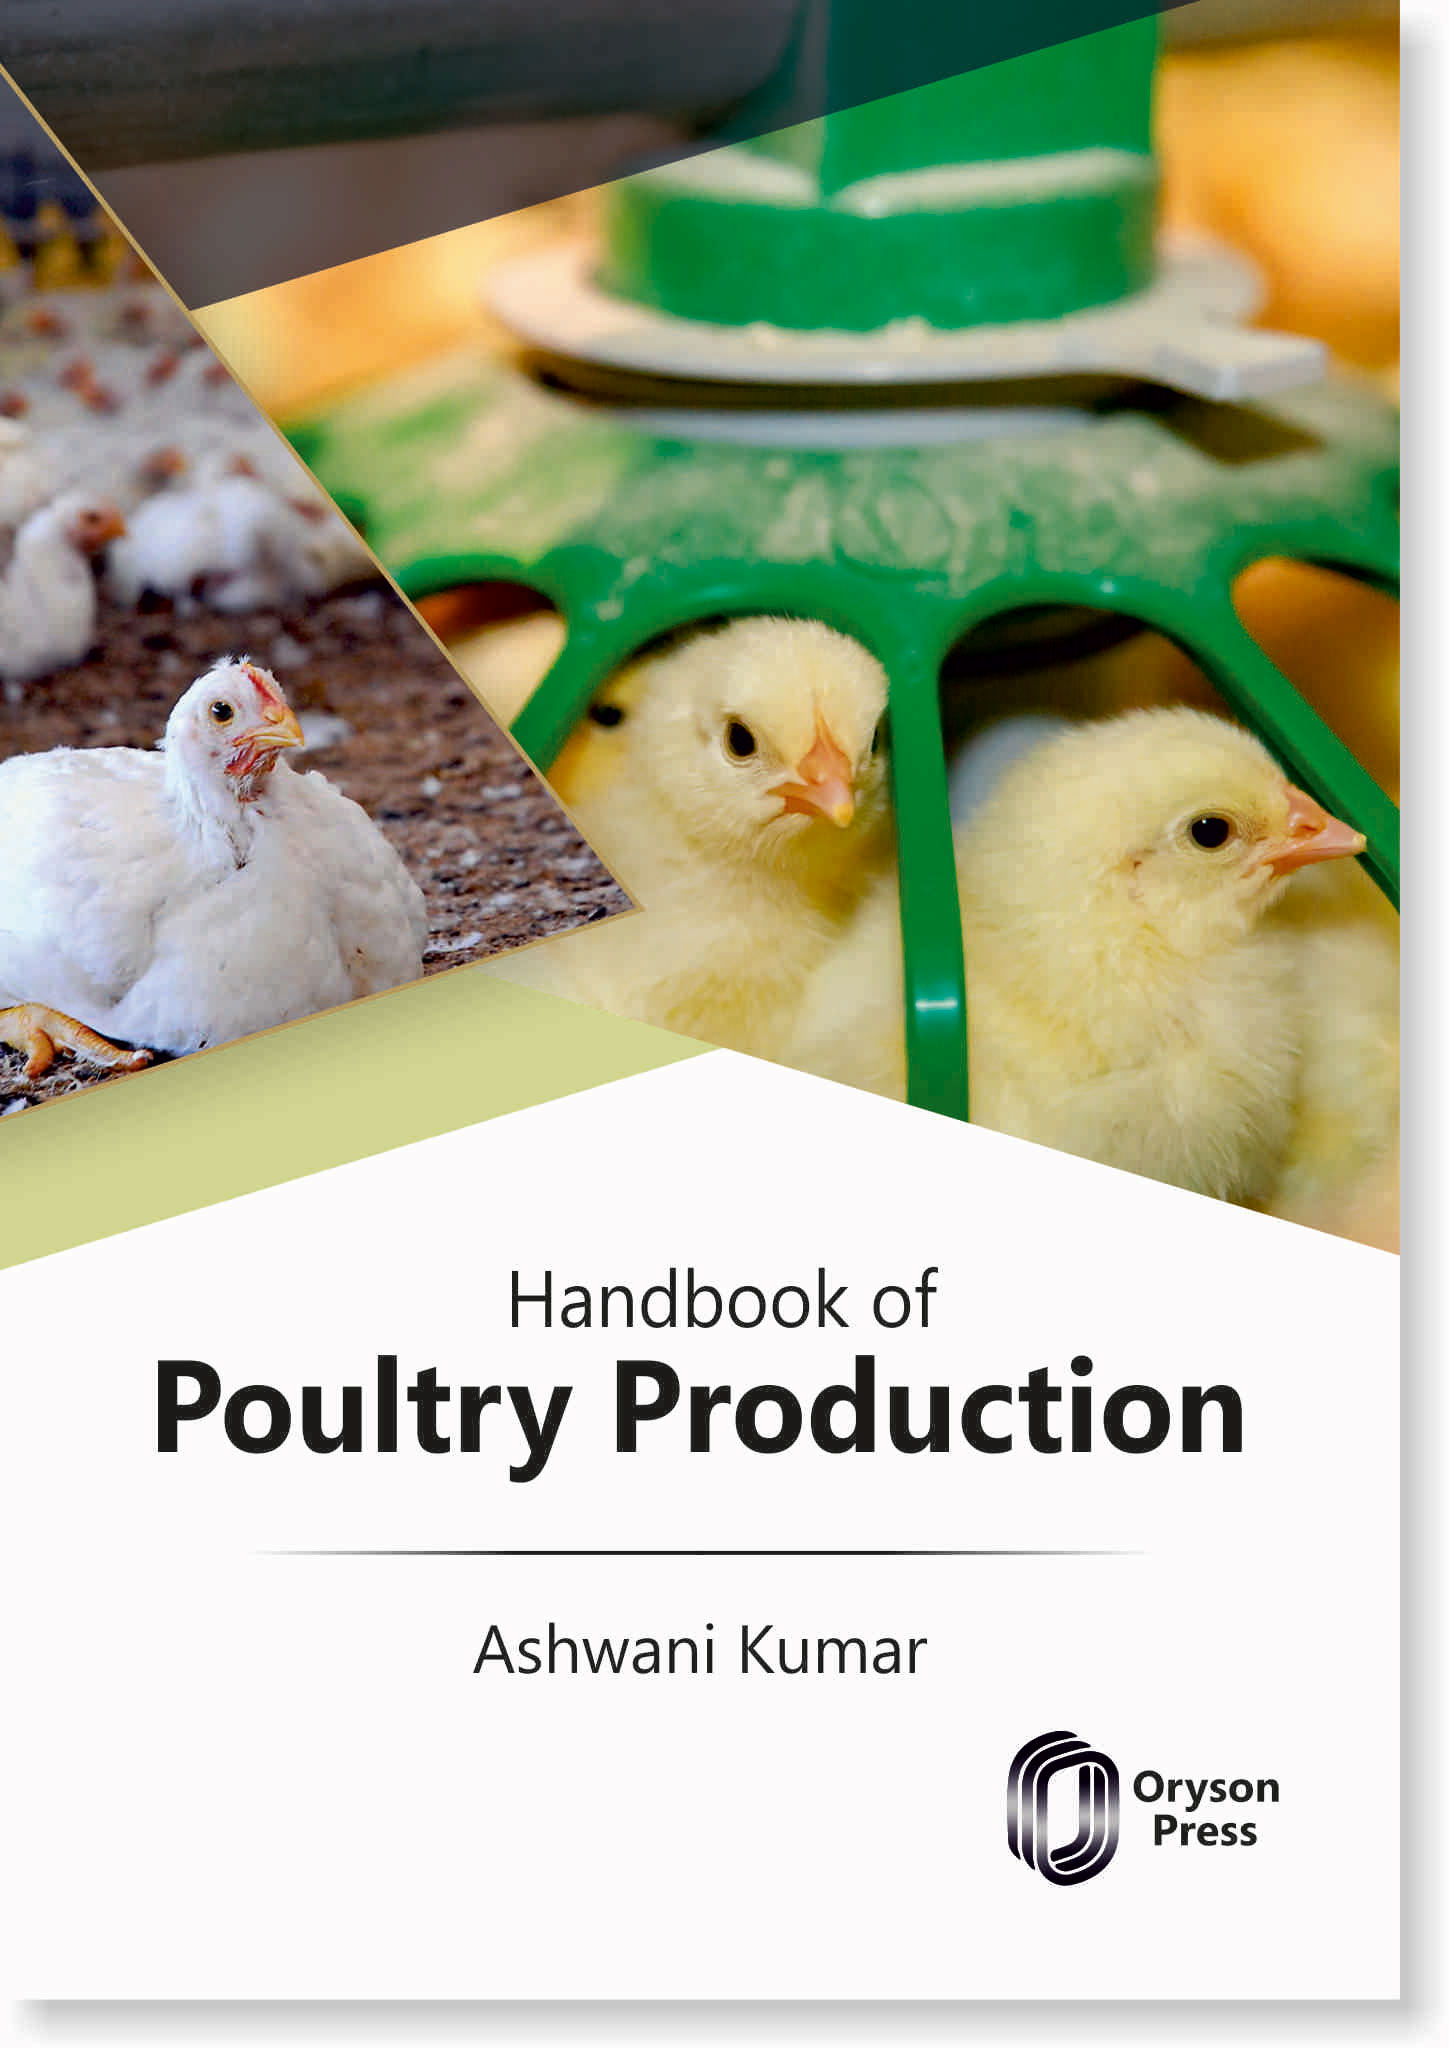 thesis title about poultry production